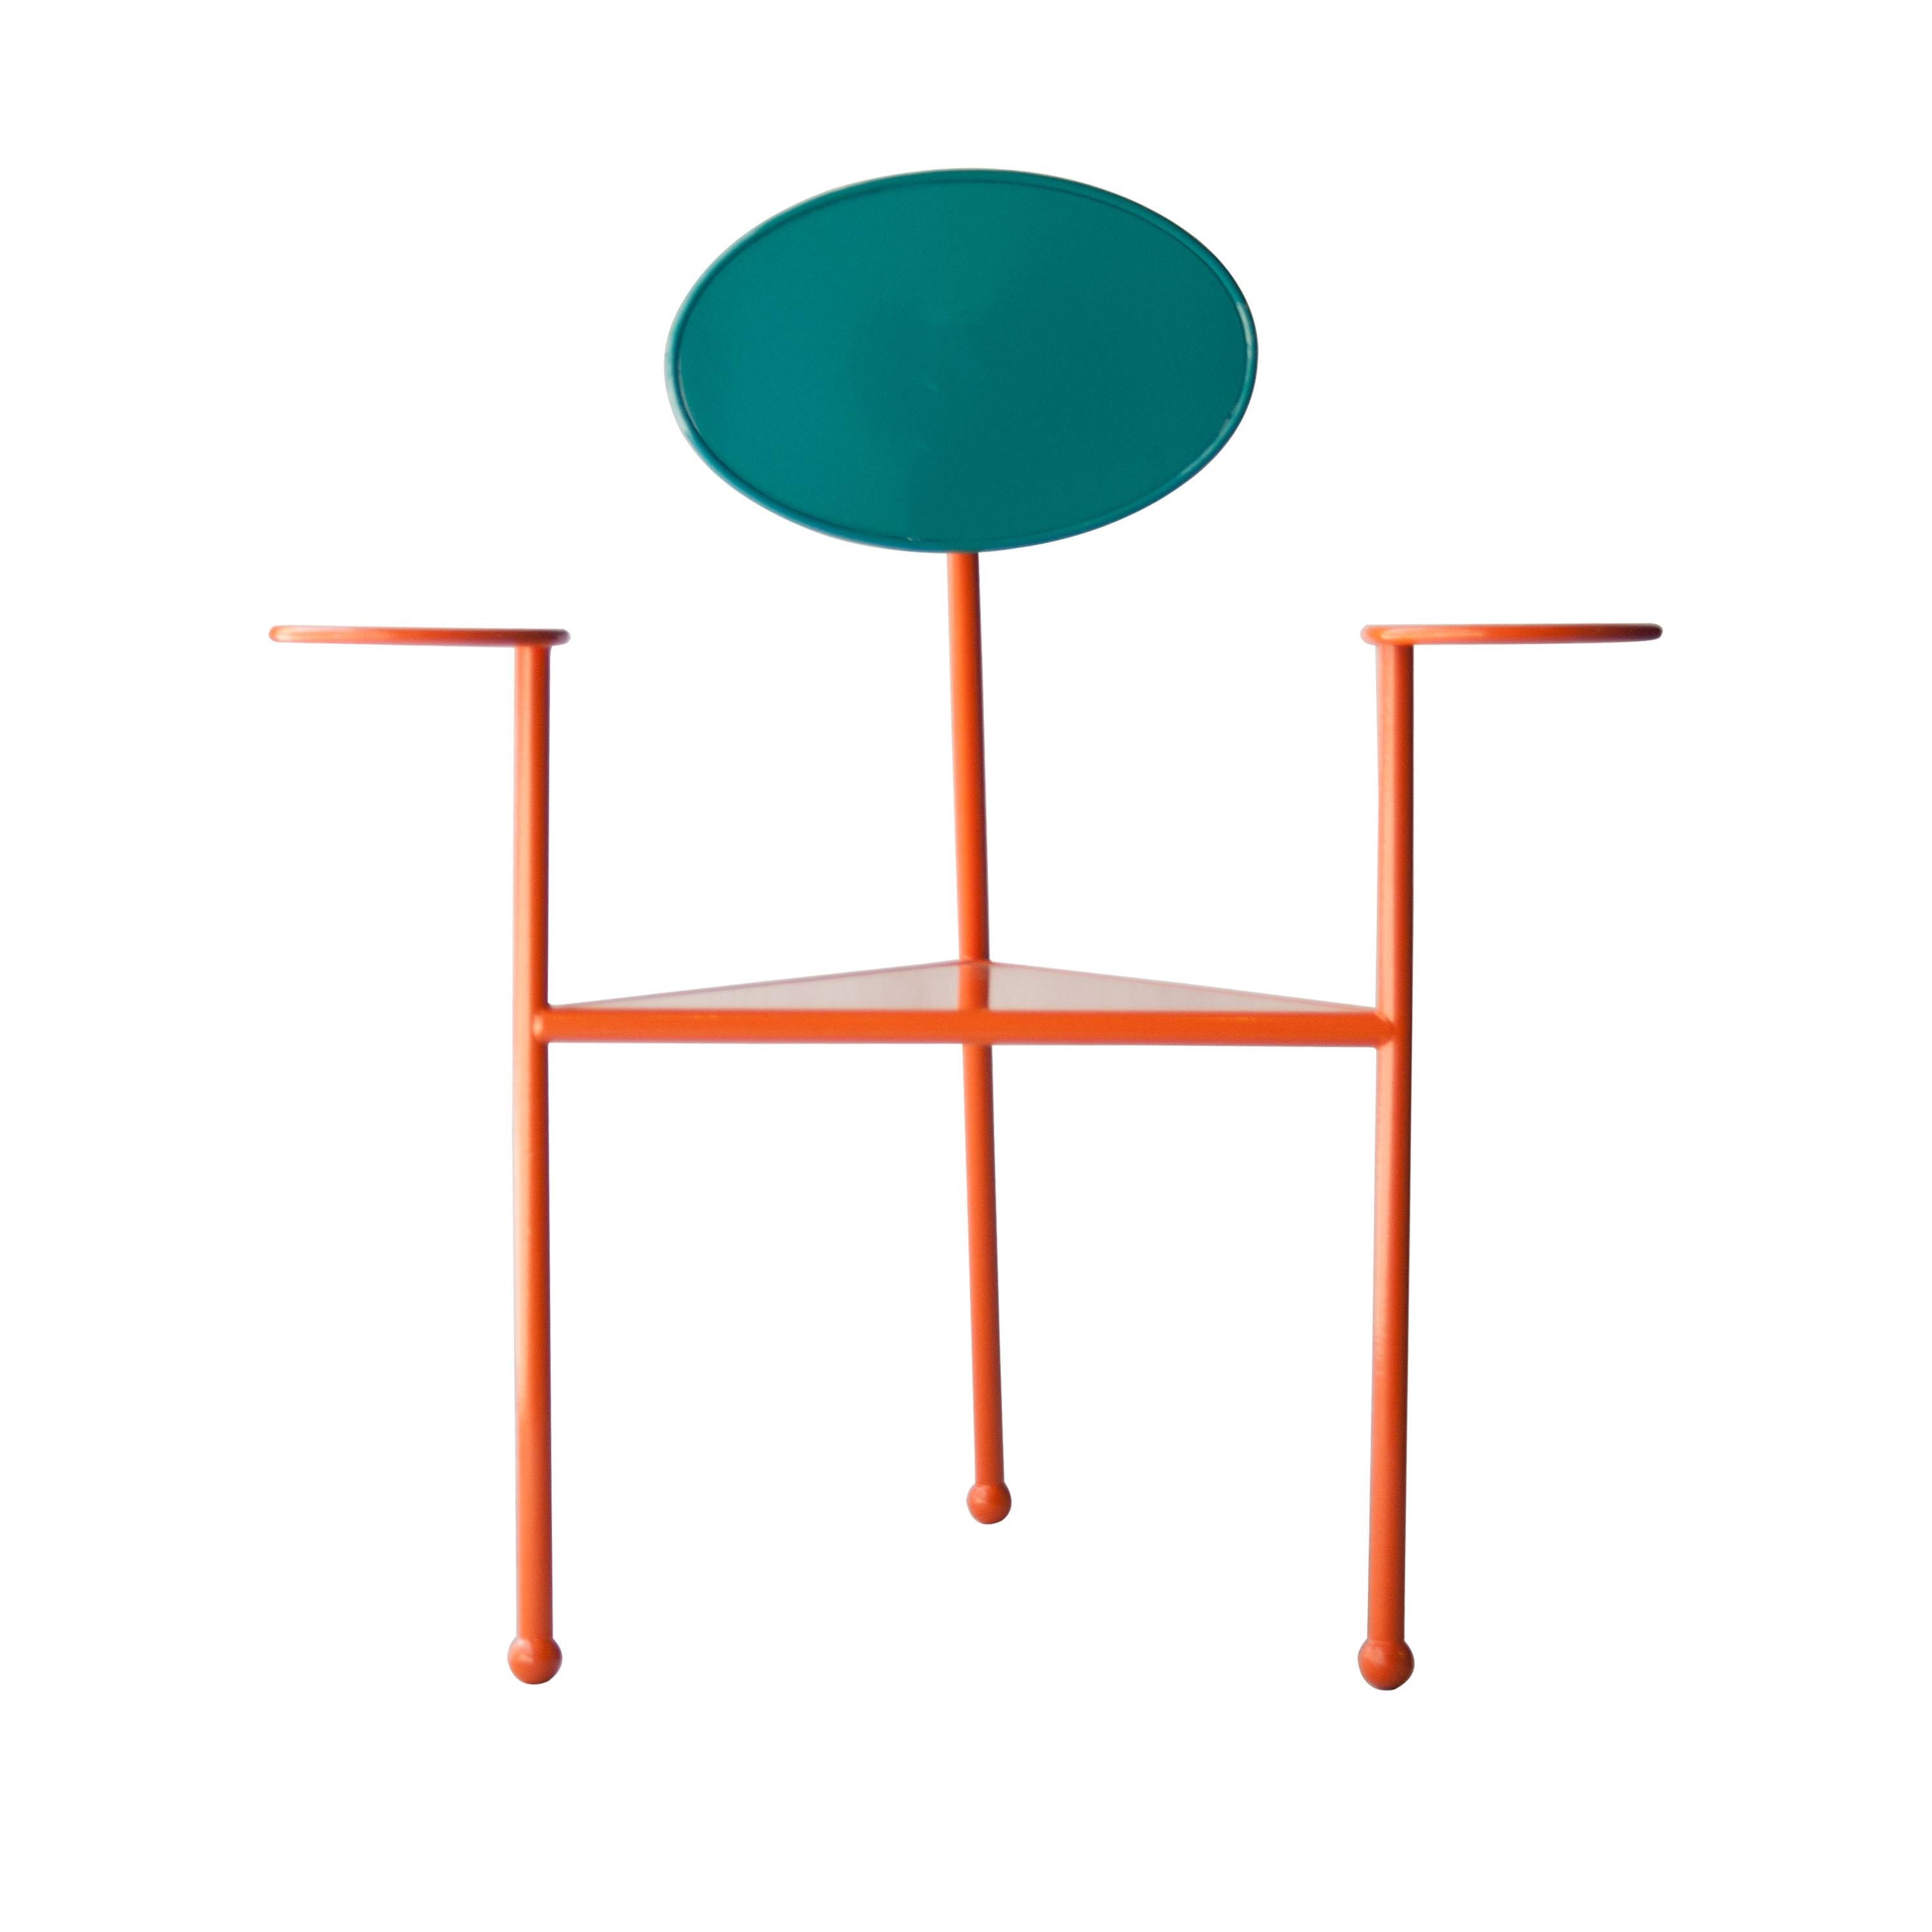 Two chairs designed by Kresta Design Studio. Steel structure lacquered in two colors.